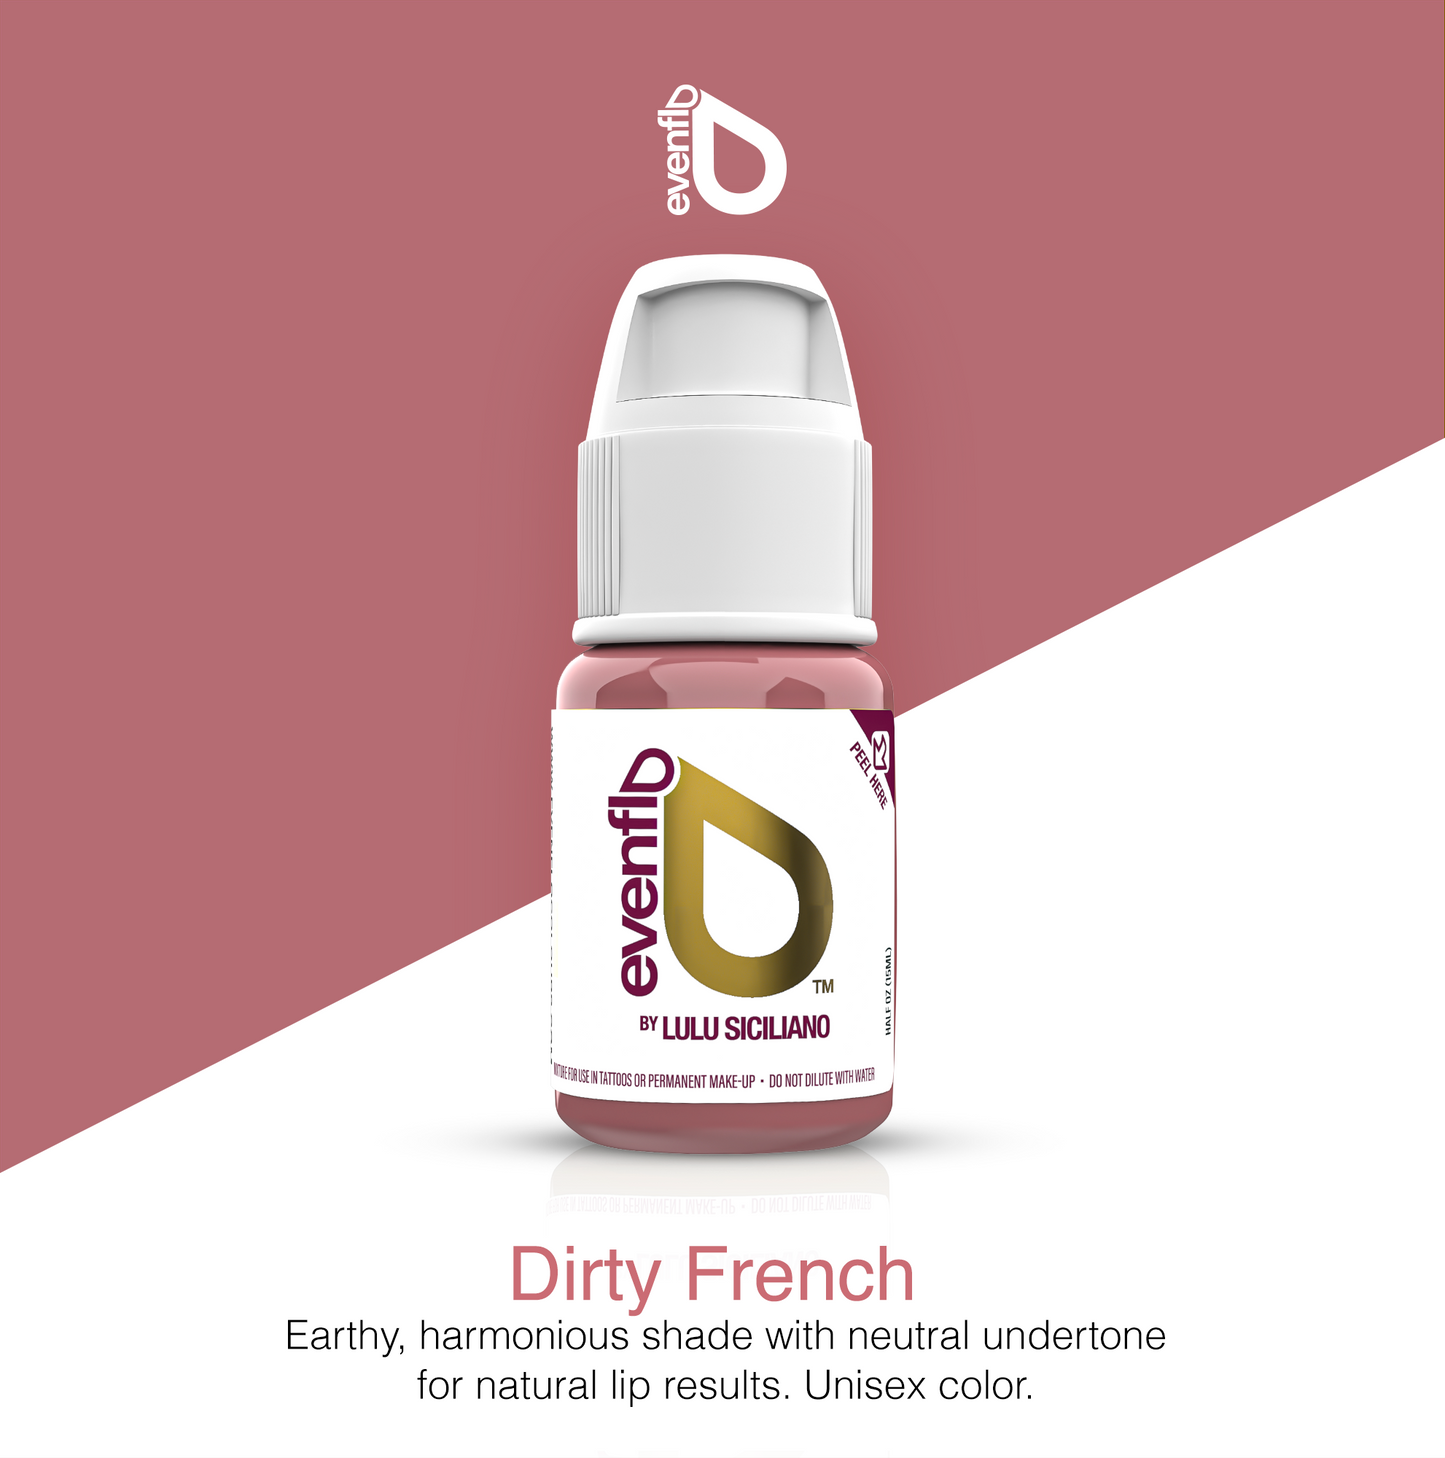 Dirty French Evenflo Pigment